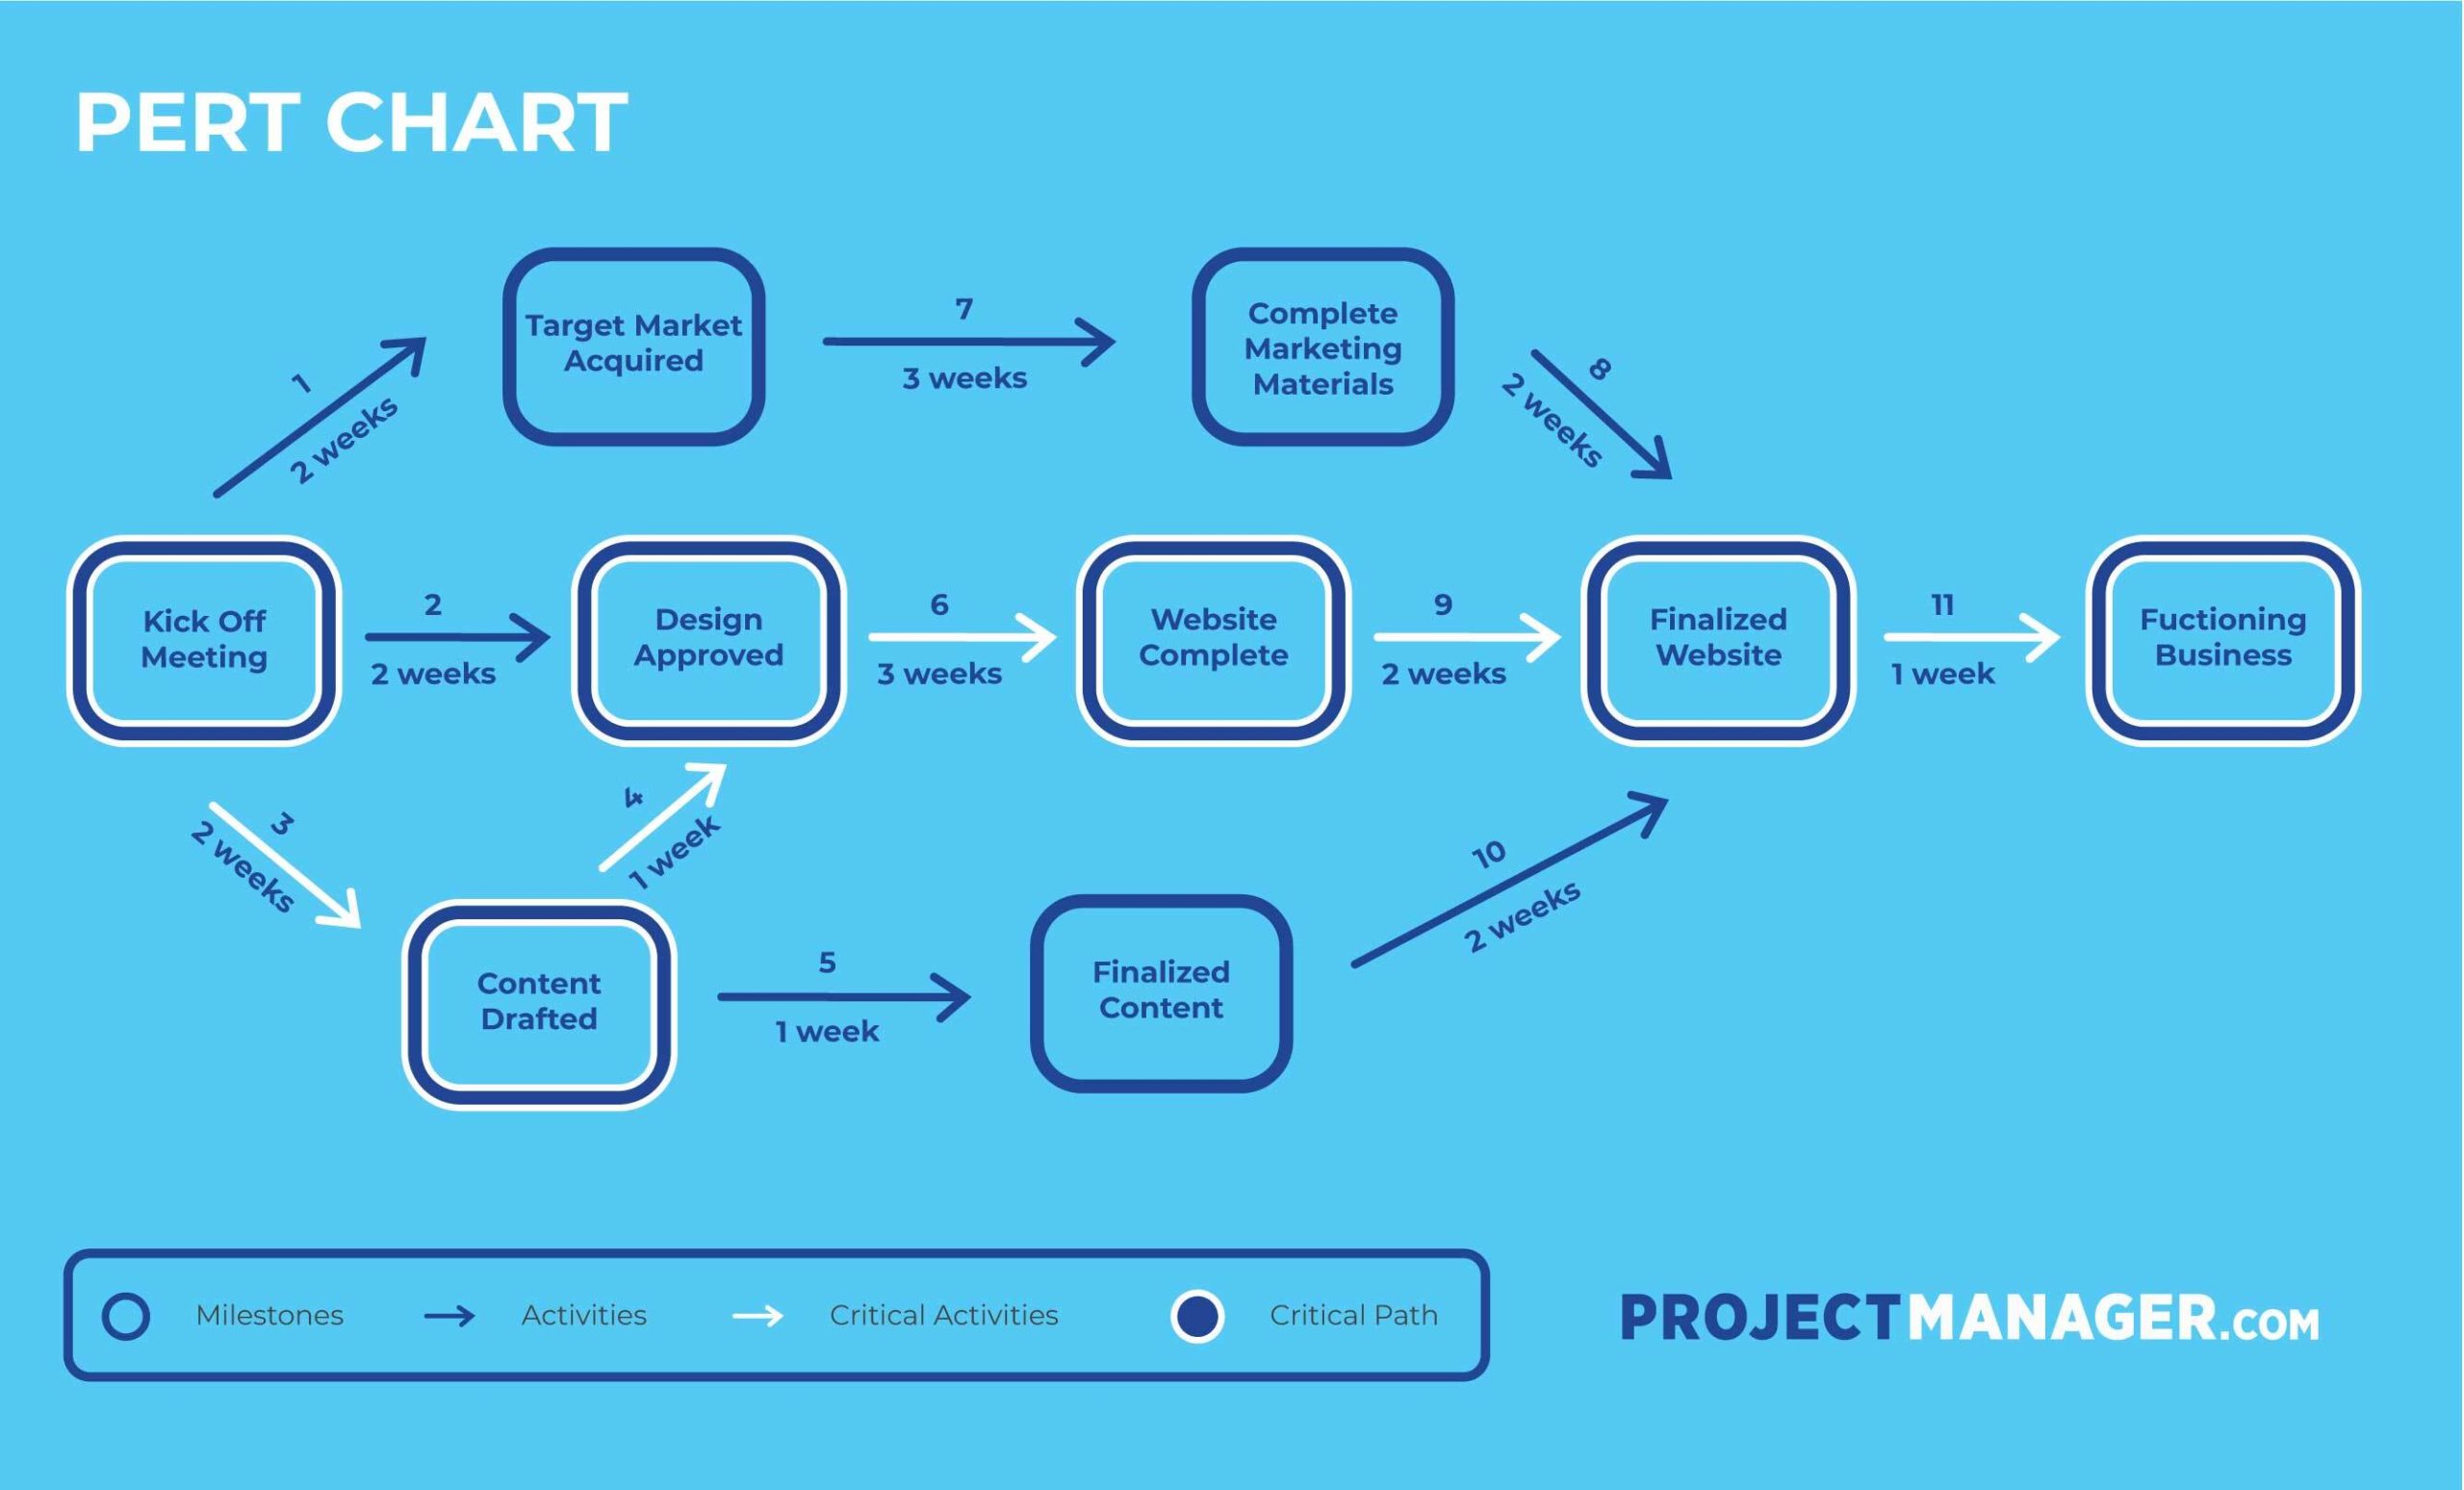 A PERT chart example showing the activities of a project